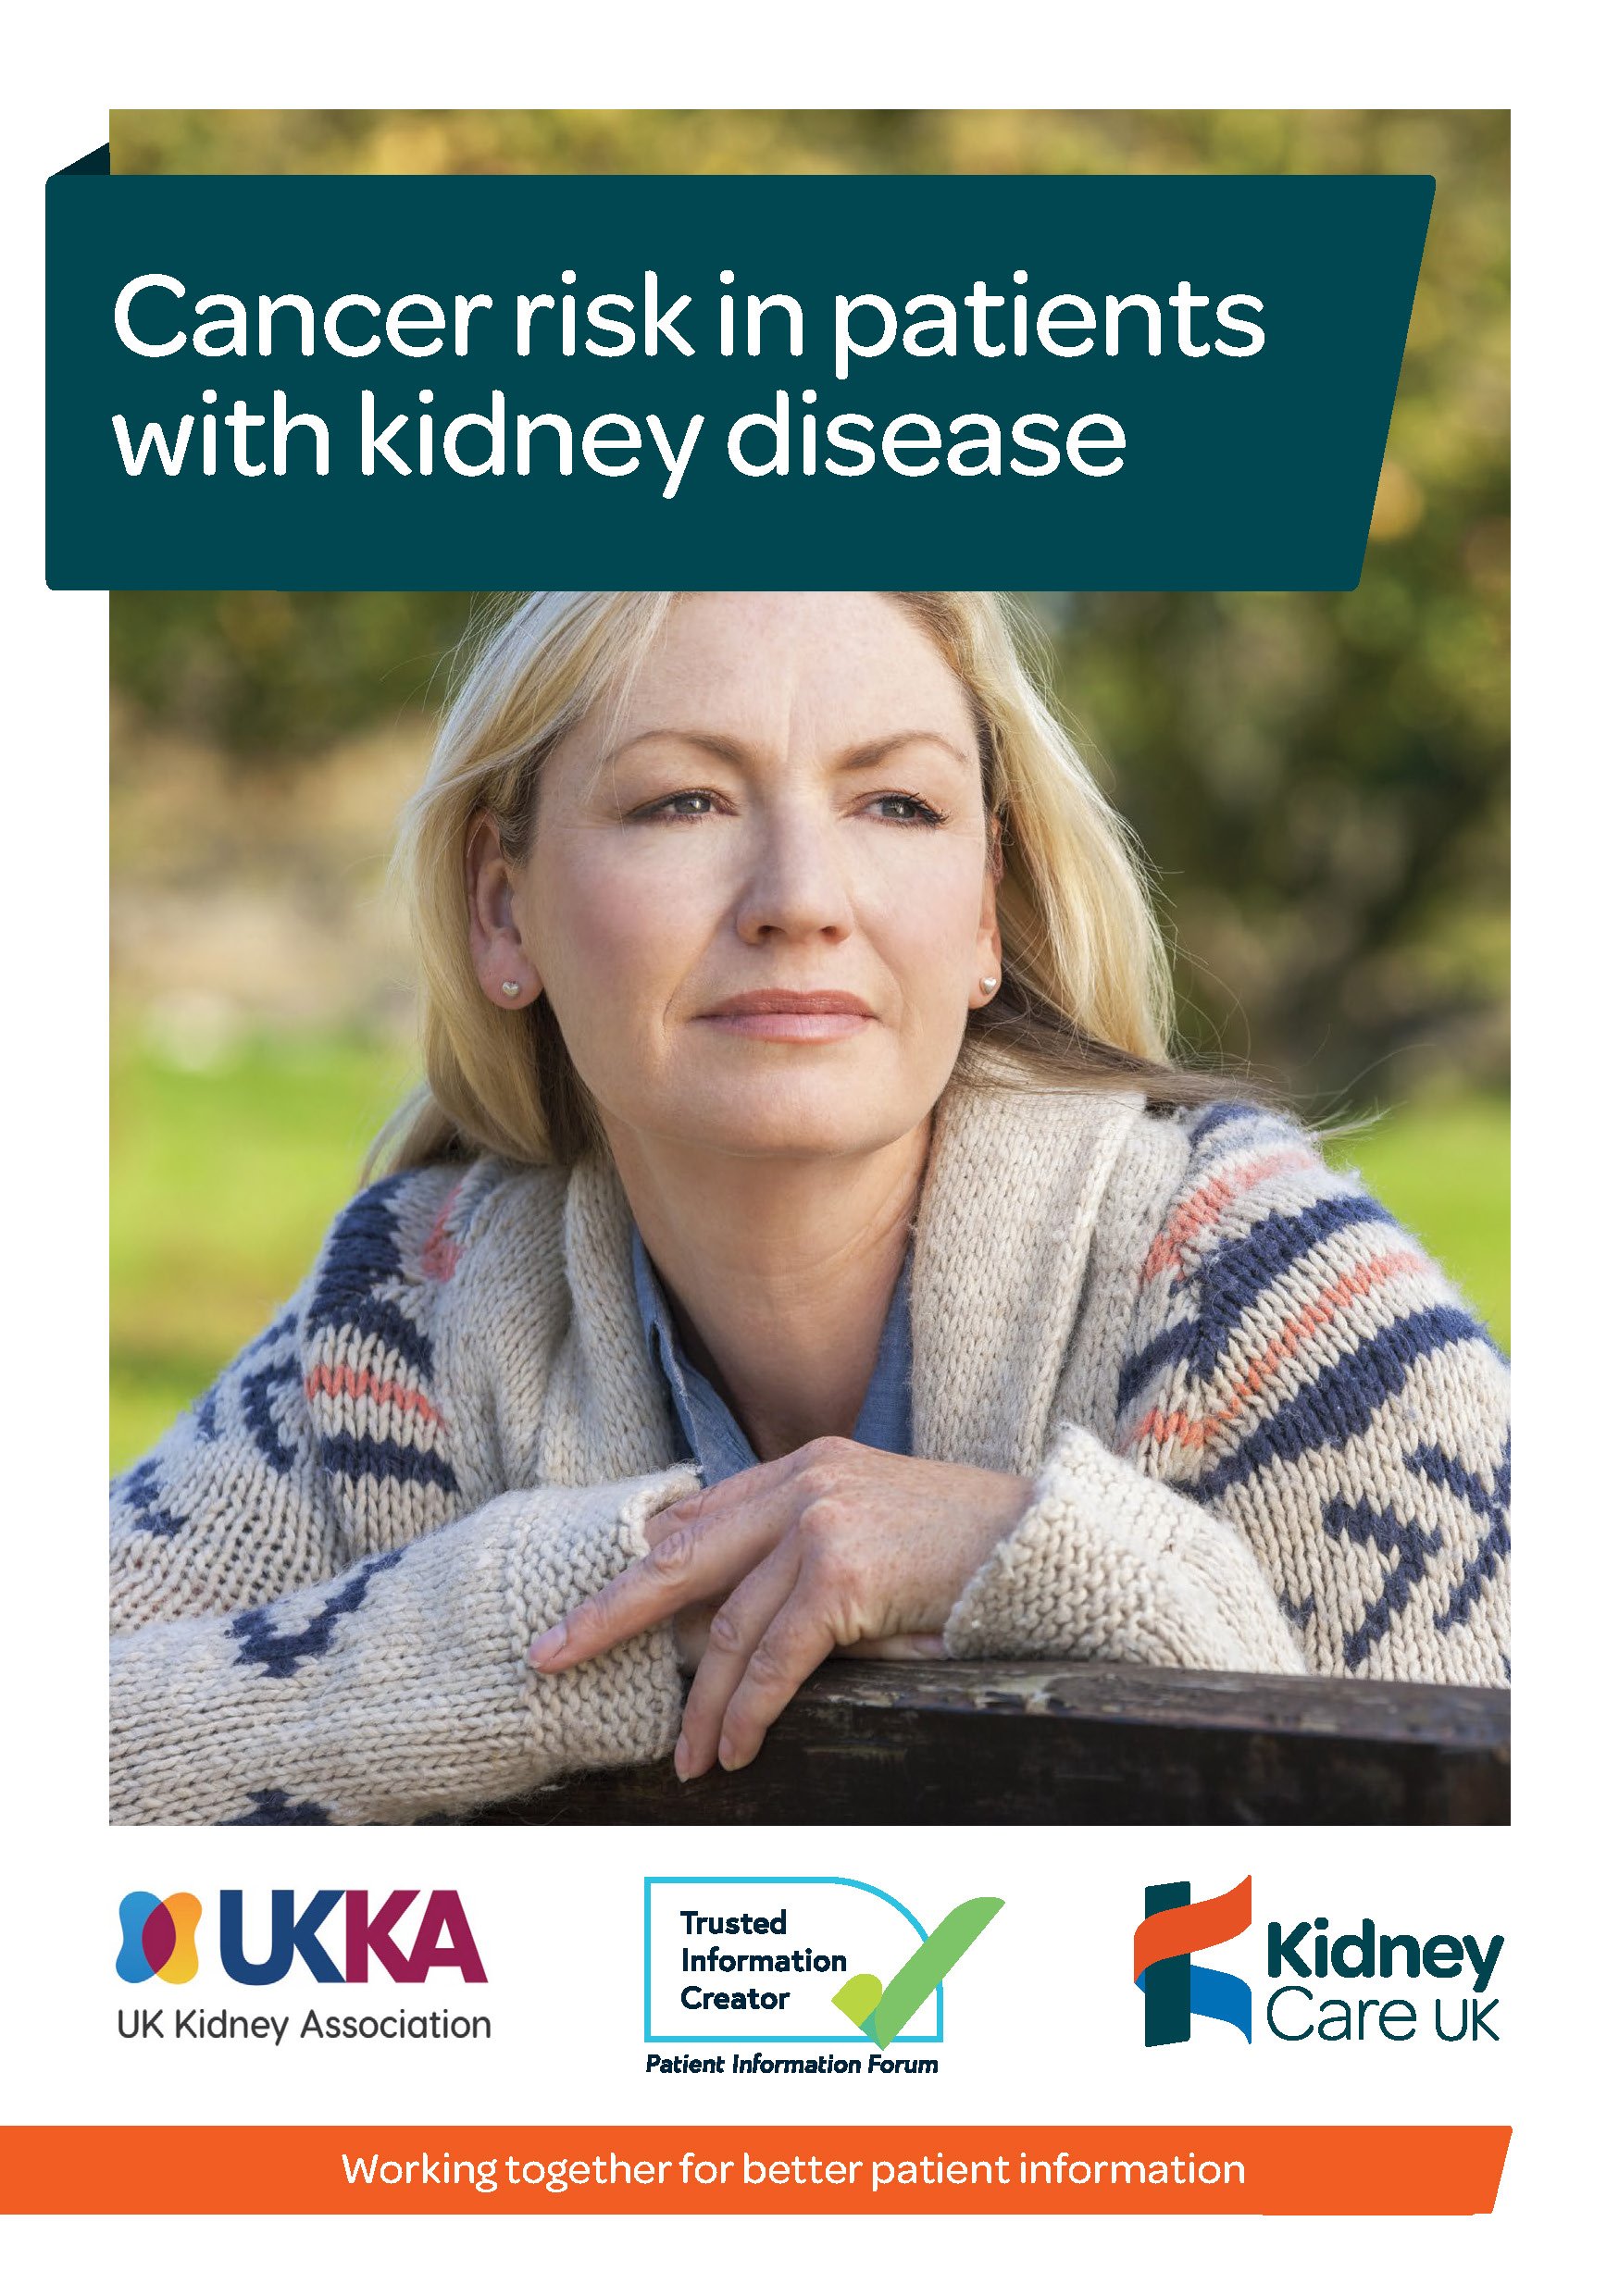 Cancer risk in patients with kidney disease | Kidney Care UK